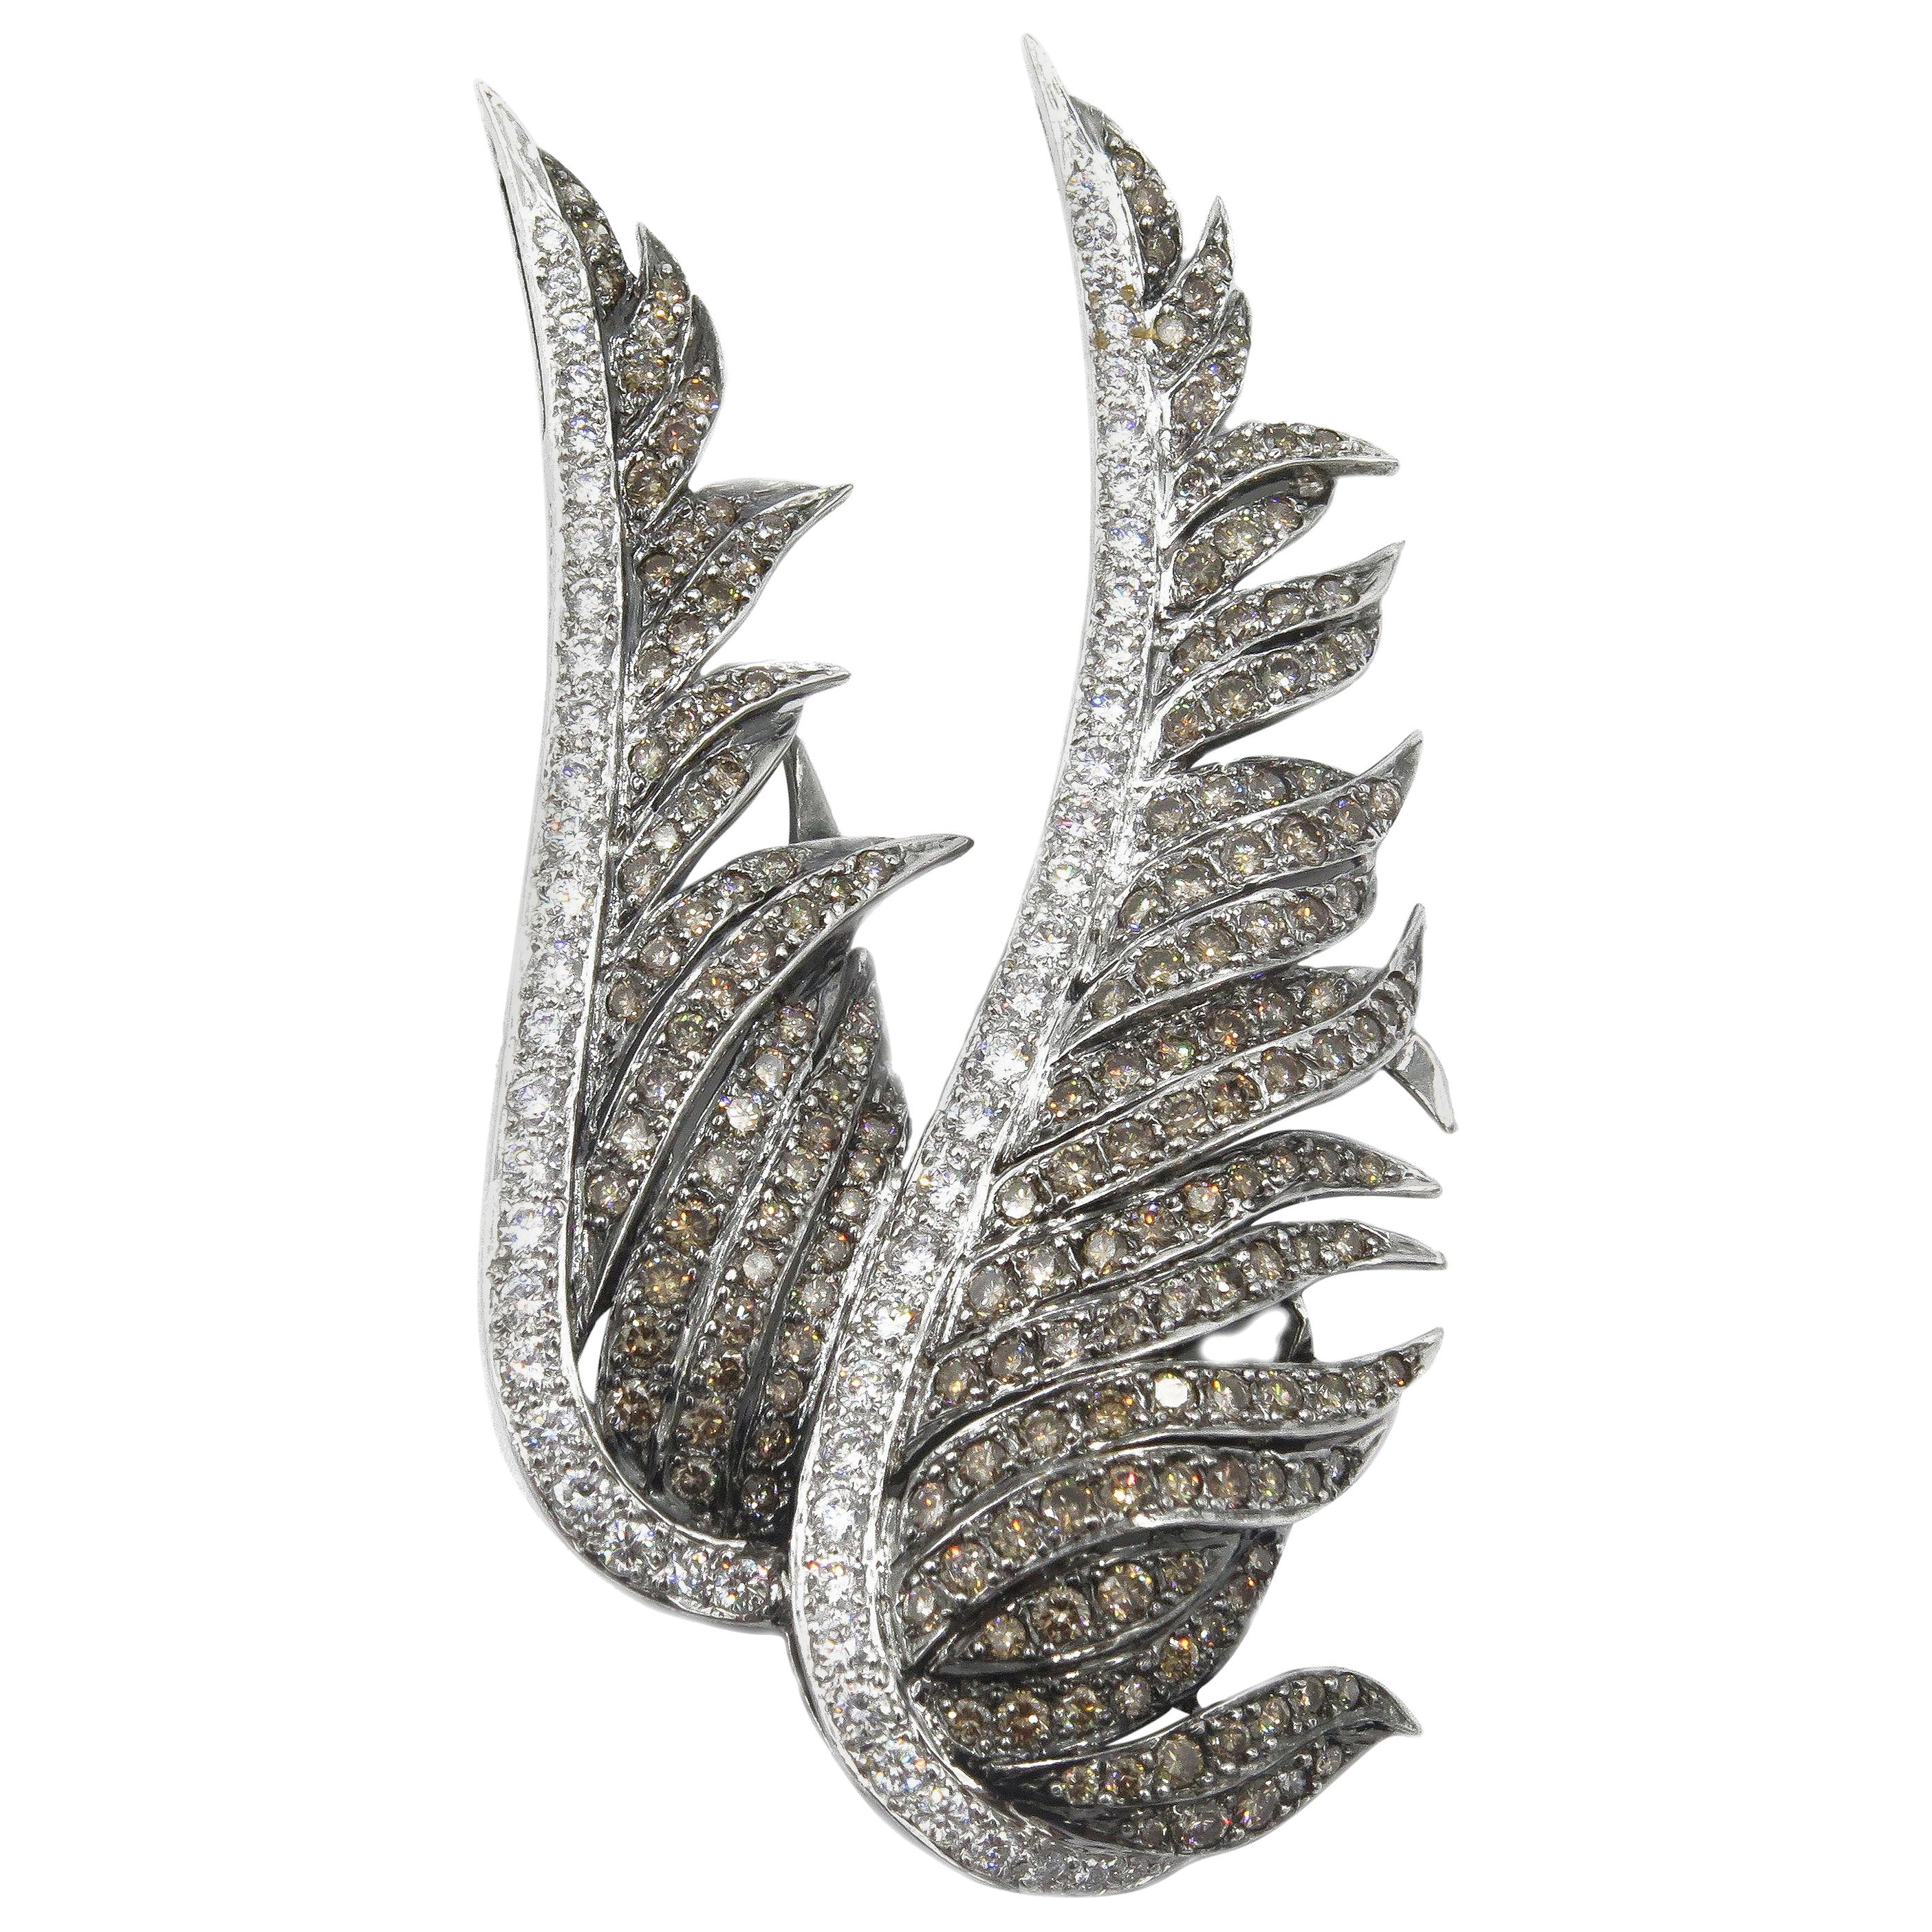 18 Karat White Gold Brooch of Carved Wings with Encrusted Diamonds